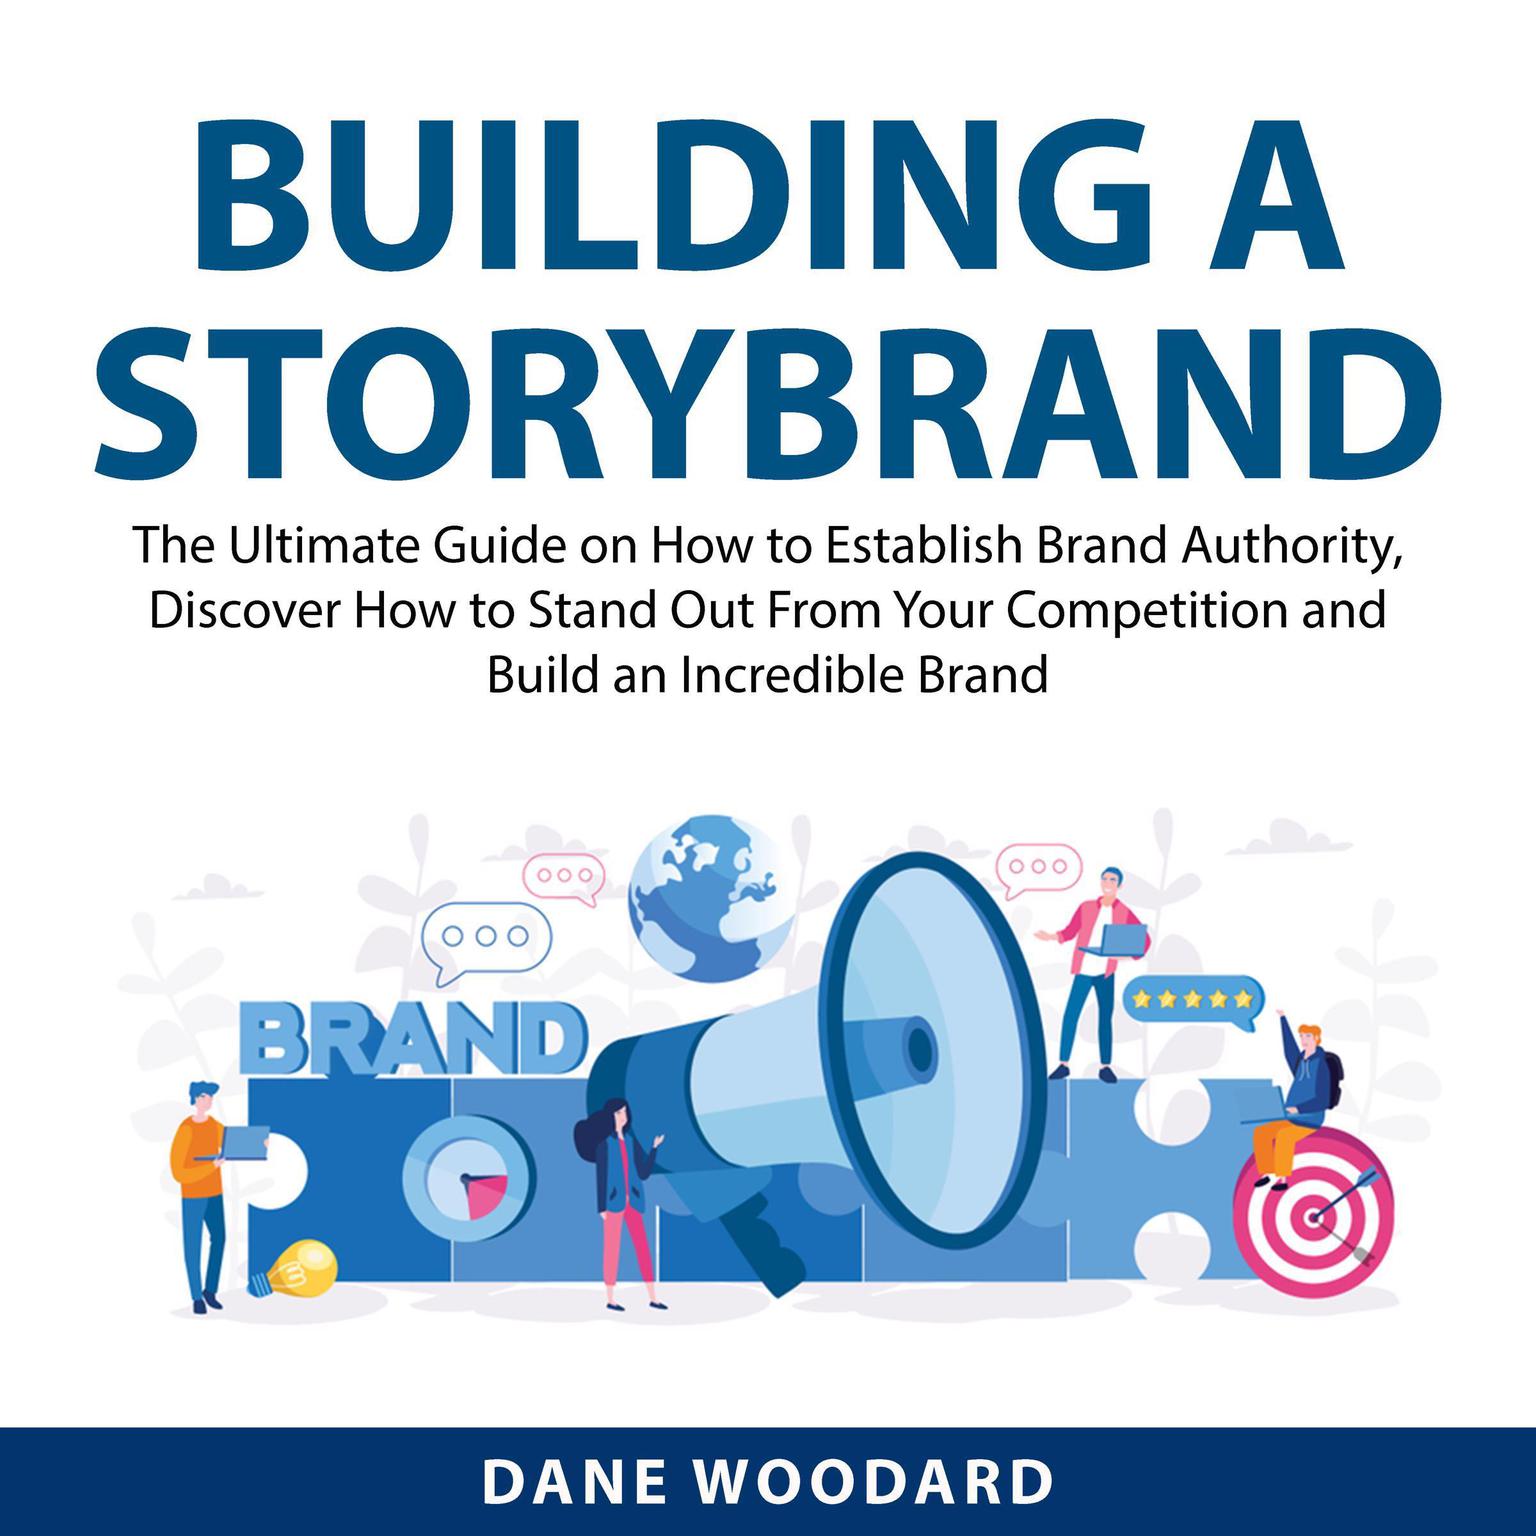 Building a StoryBrand: The Ultimate Guide on How to Establish Brand Authority, Discover How to Stand Out From Your Competition and Build an Incredible Brand  Audiobook, by Dane Woodard